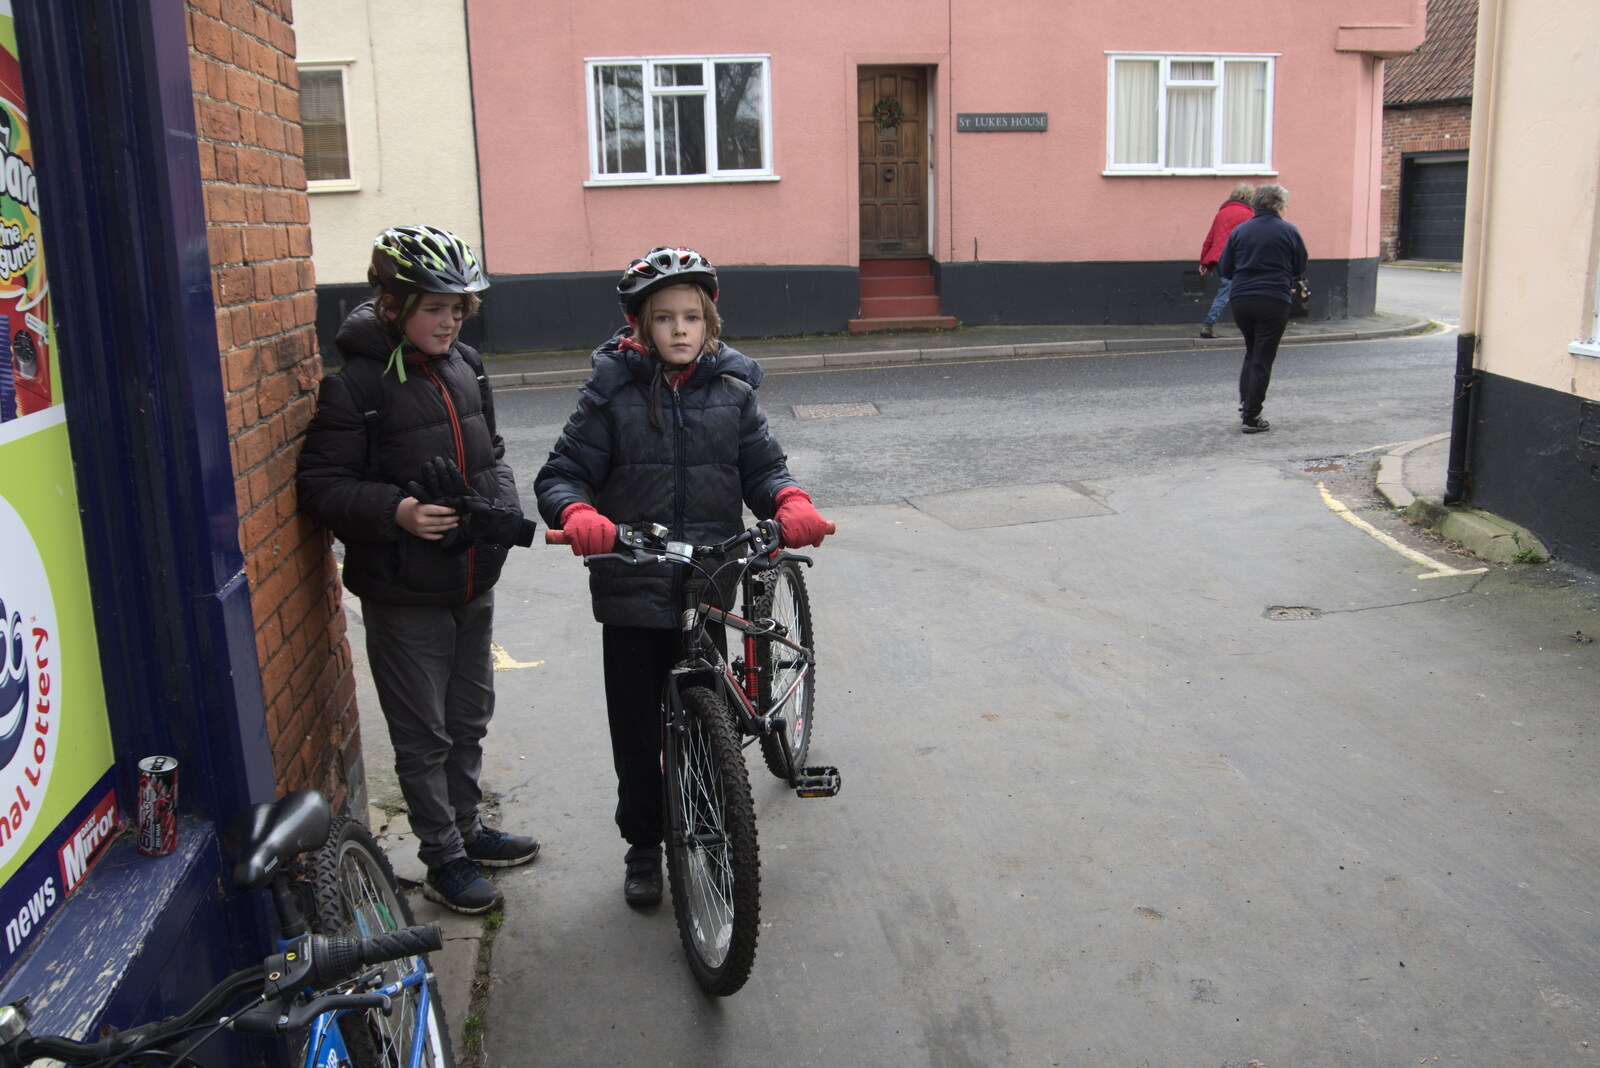 The boys outside McColl's in Eye from The Old Sewage Works, The Avenue, Brome, Suffolk - 20th February 2021